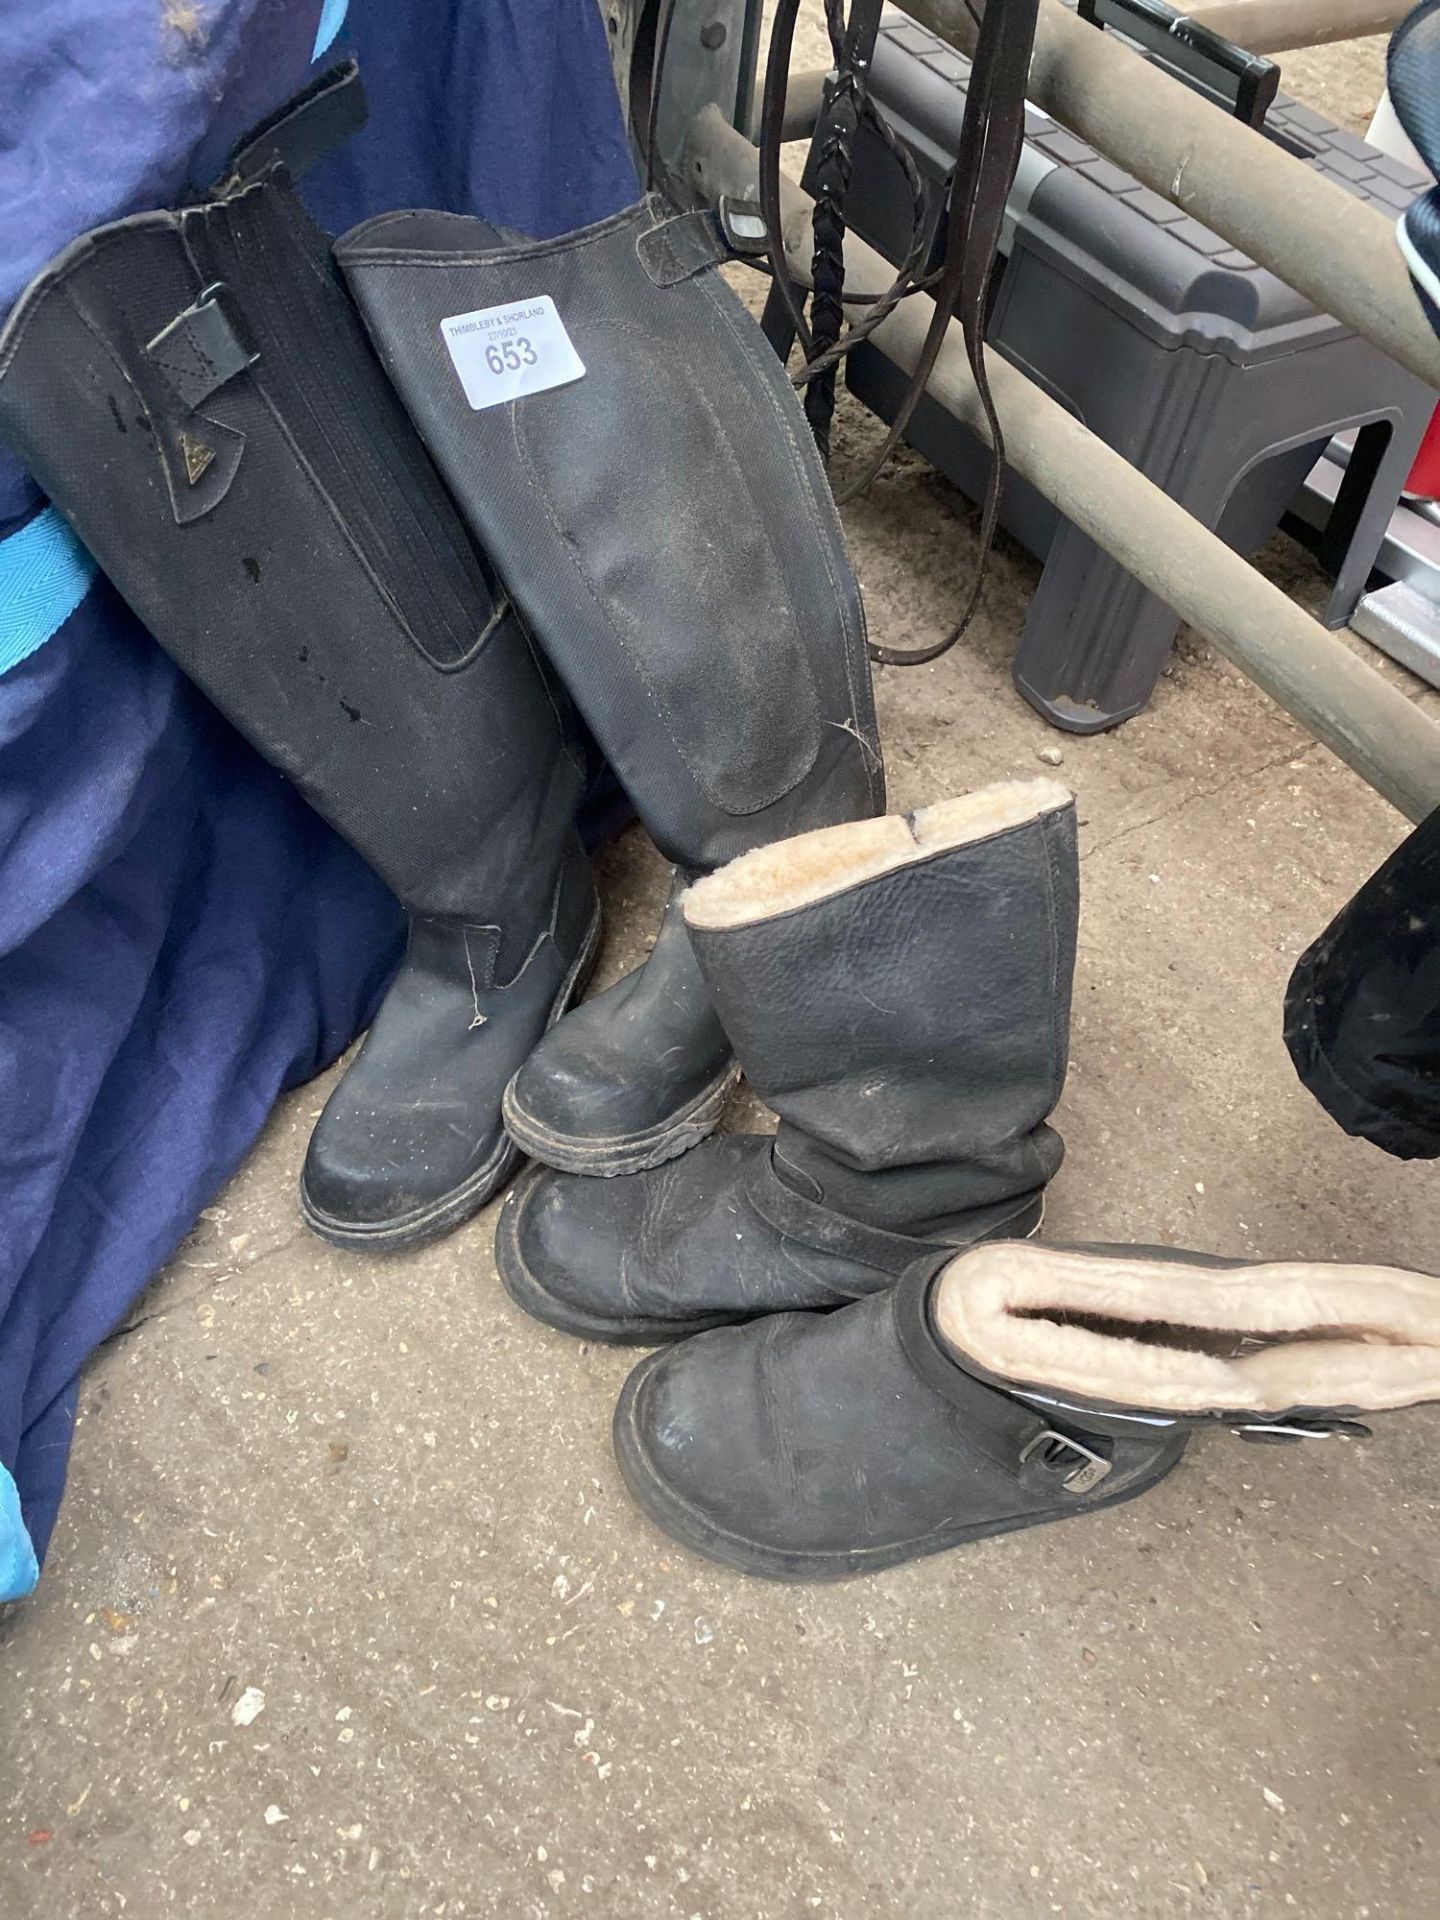 Pair of Mountain Horse long black thermal riding boots and a pair of UGG boots.